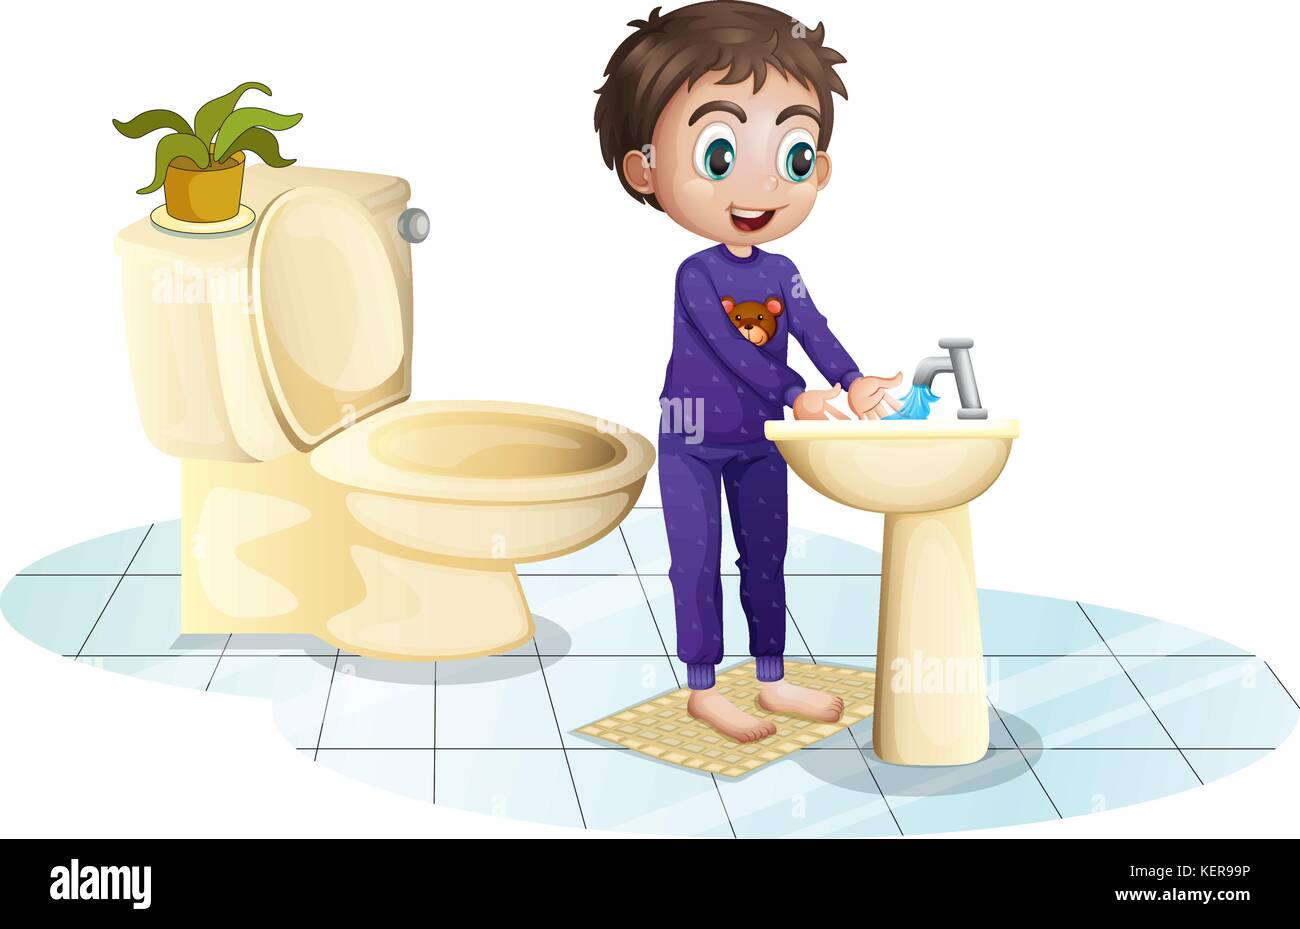 Illustration of a boy washing his hands at the sink on a white background Stock Vector